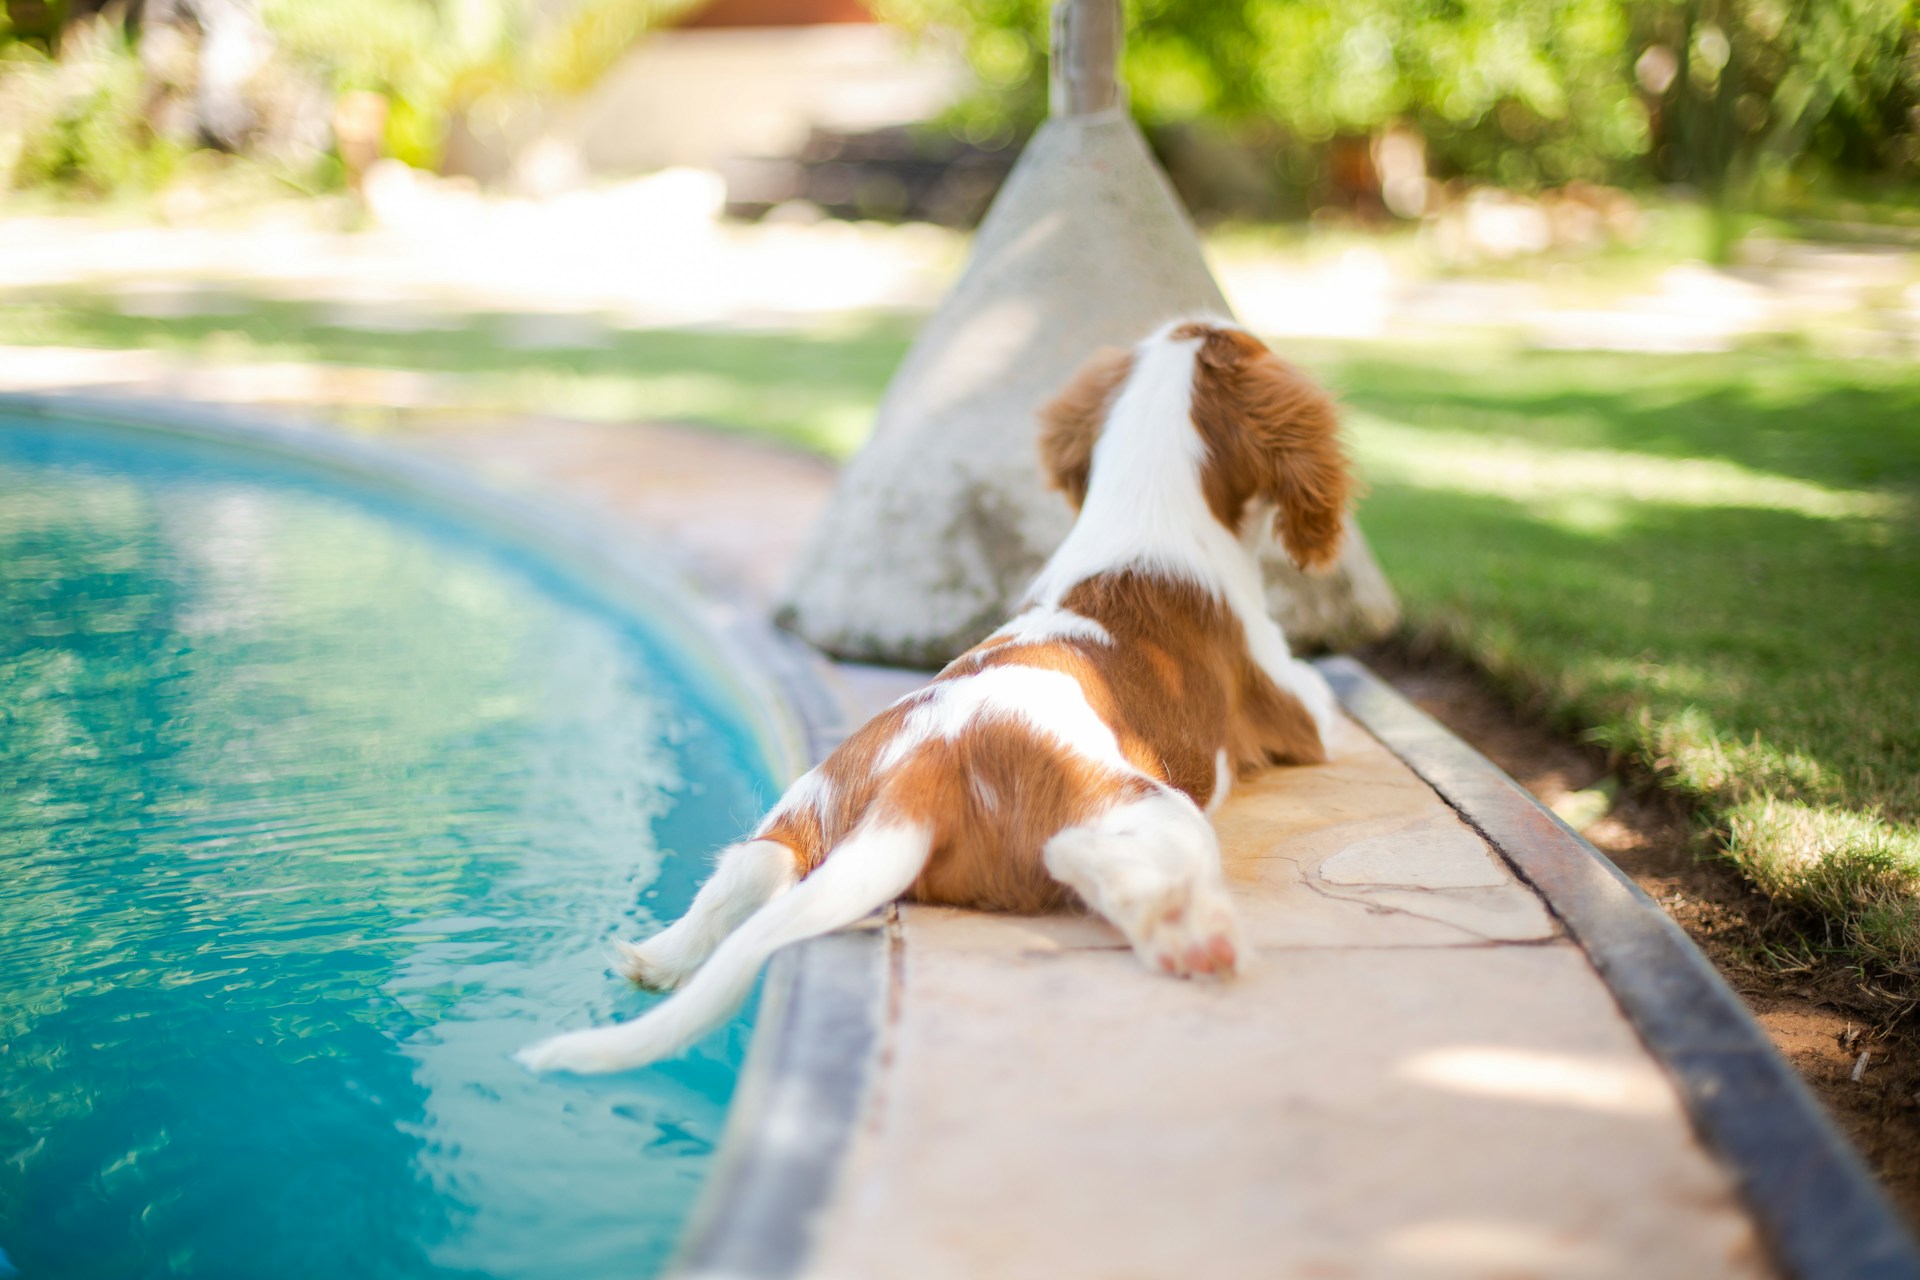 A small dog sitting by a swimming pool on a sunny day